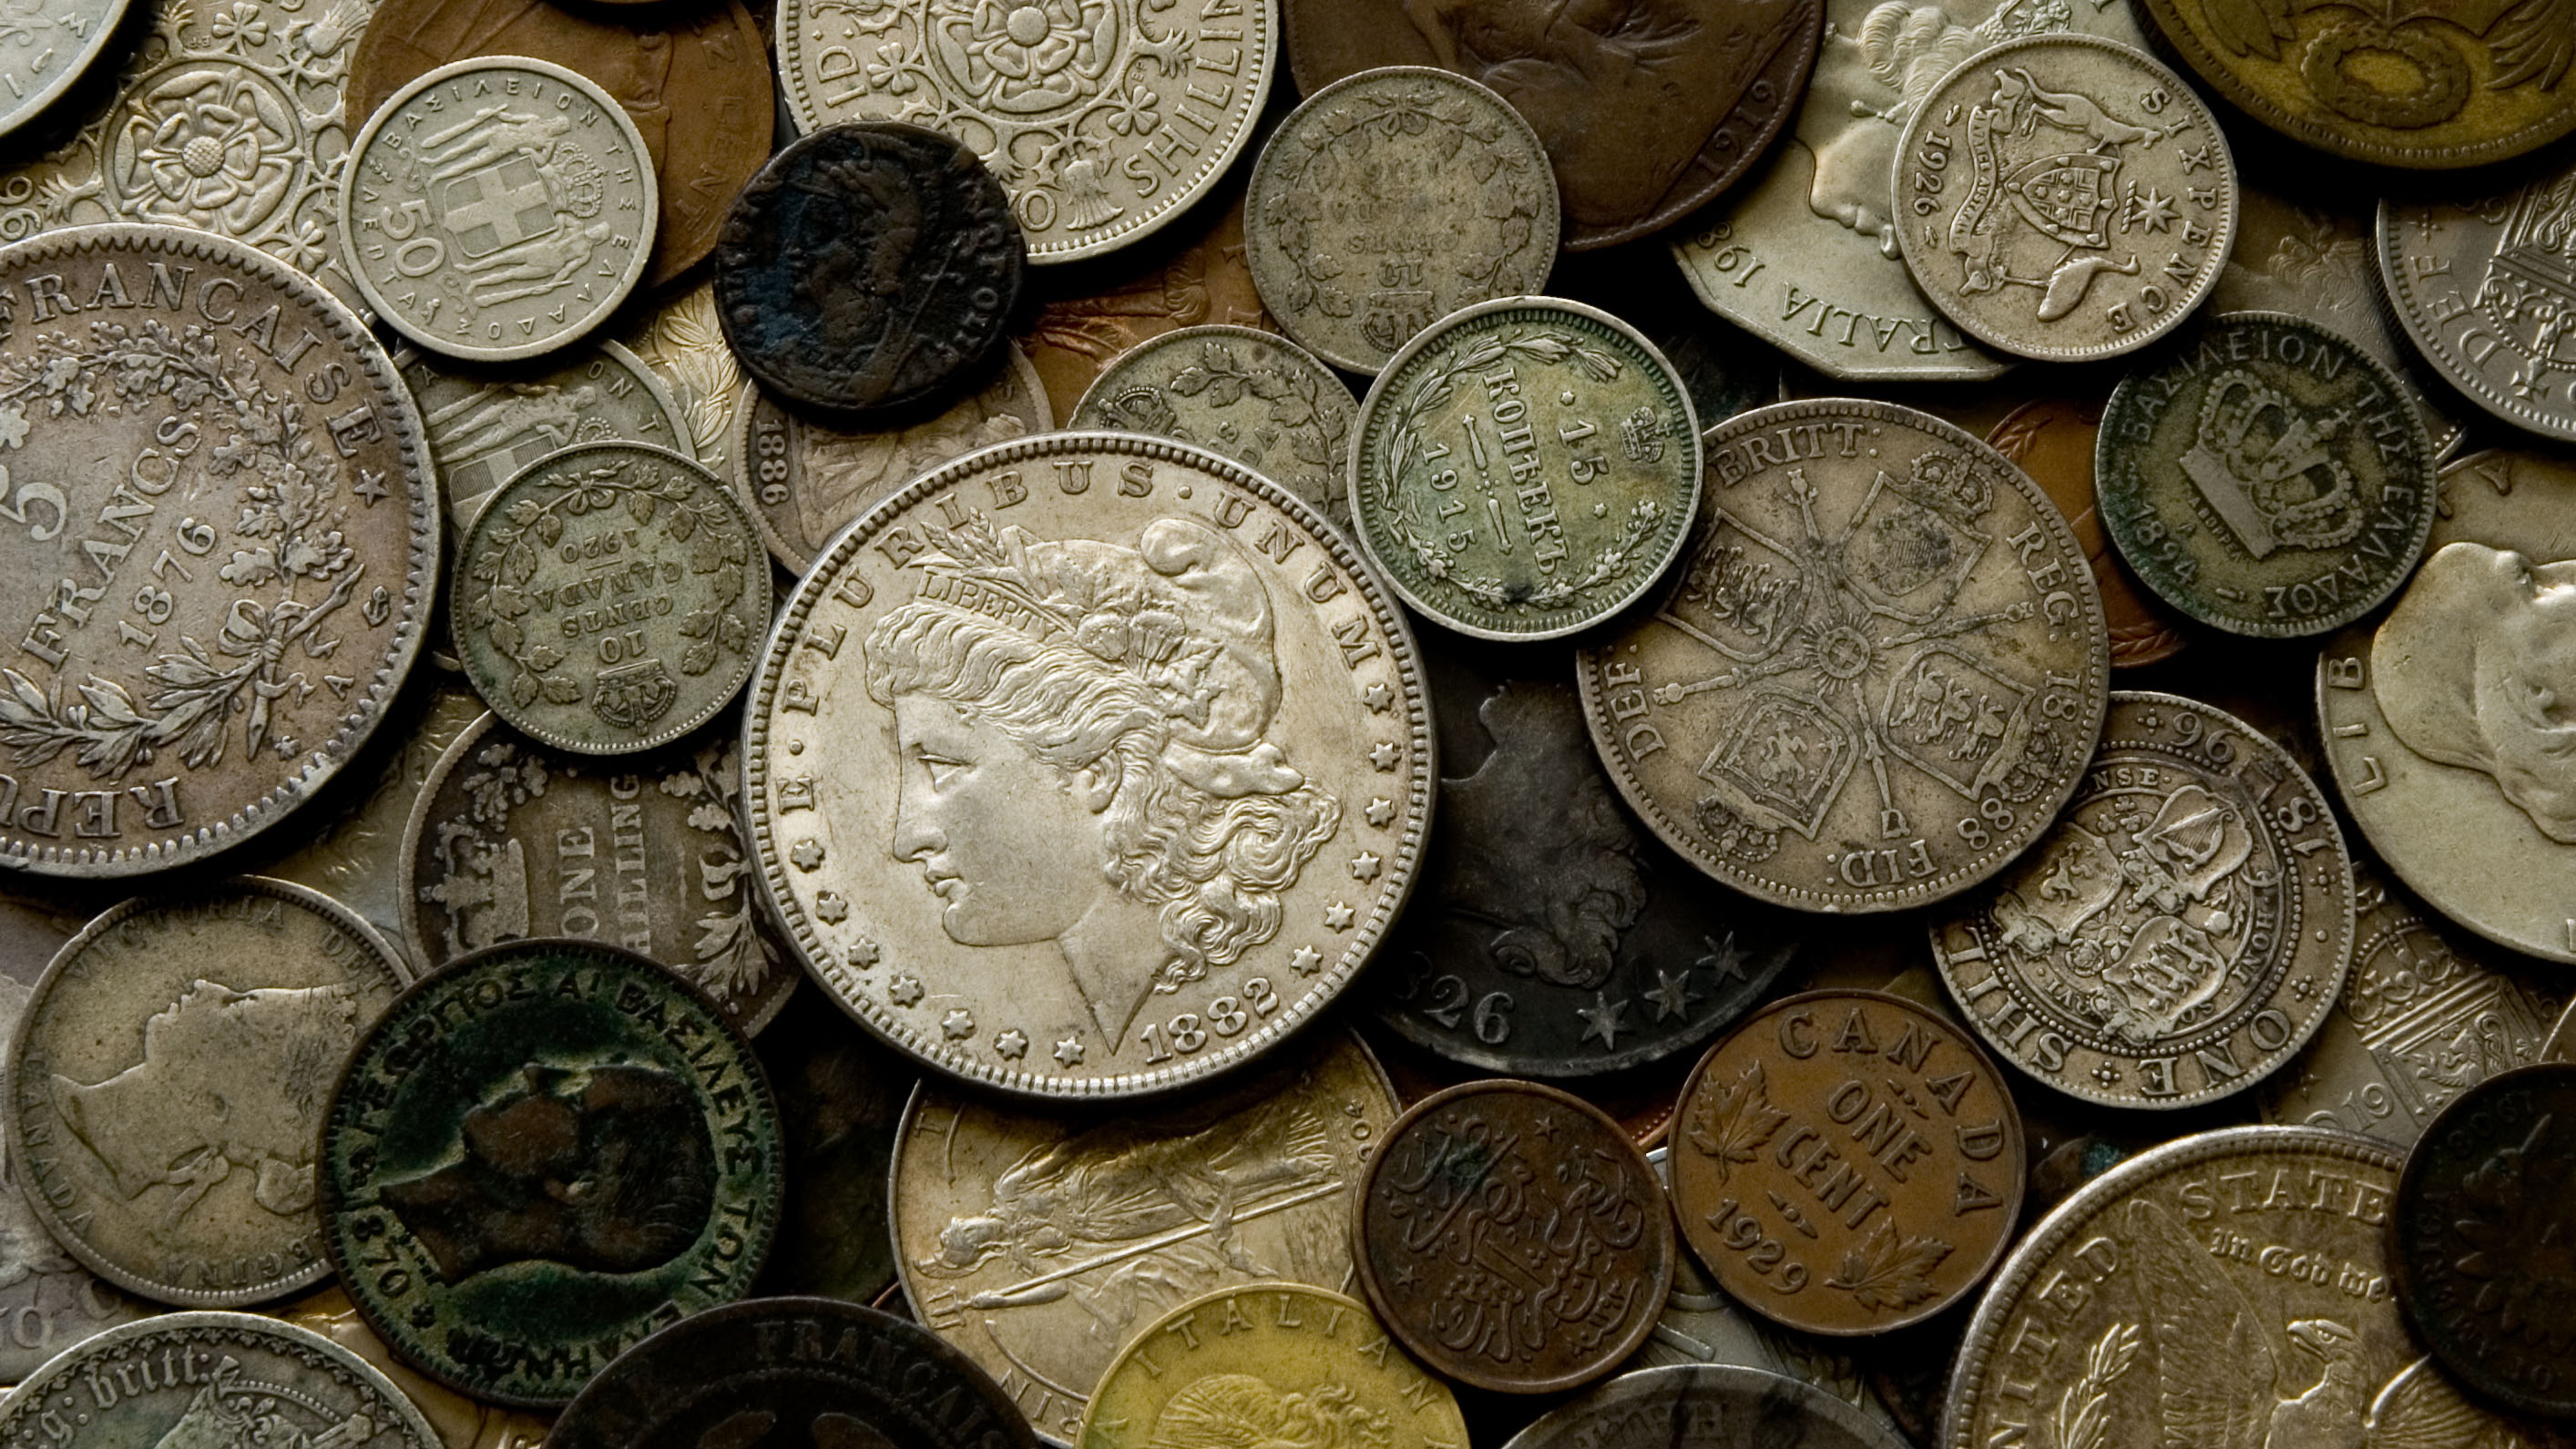 Coin collecting sees a boom from young collectors on Instagram and